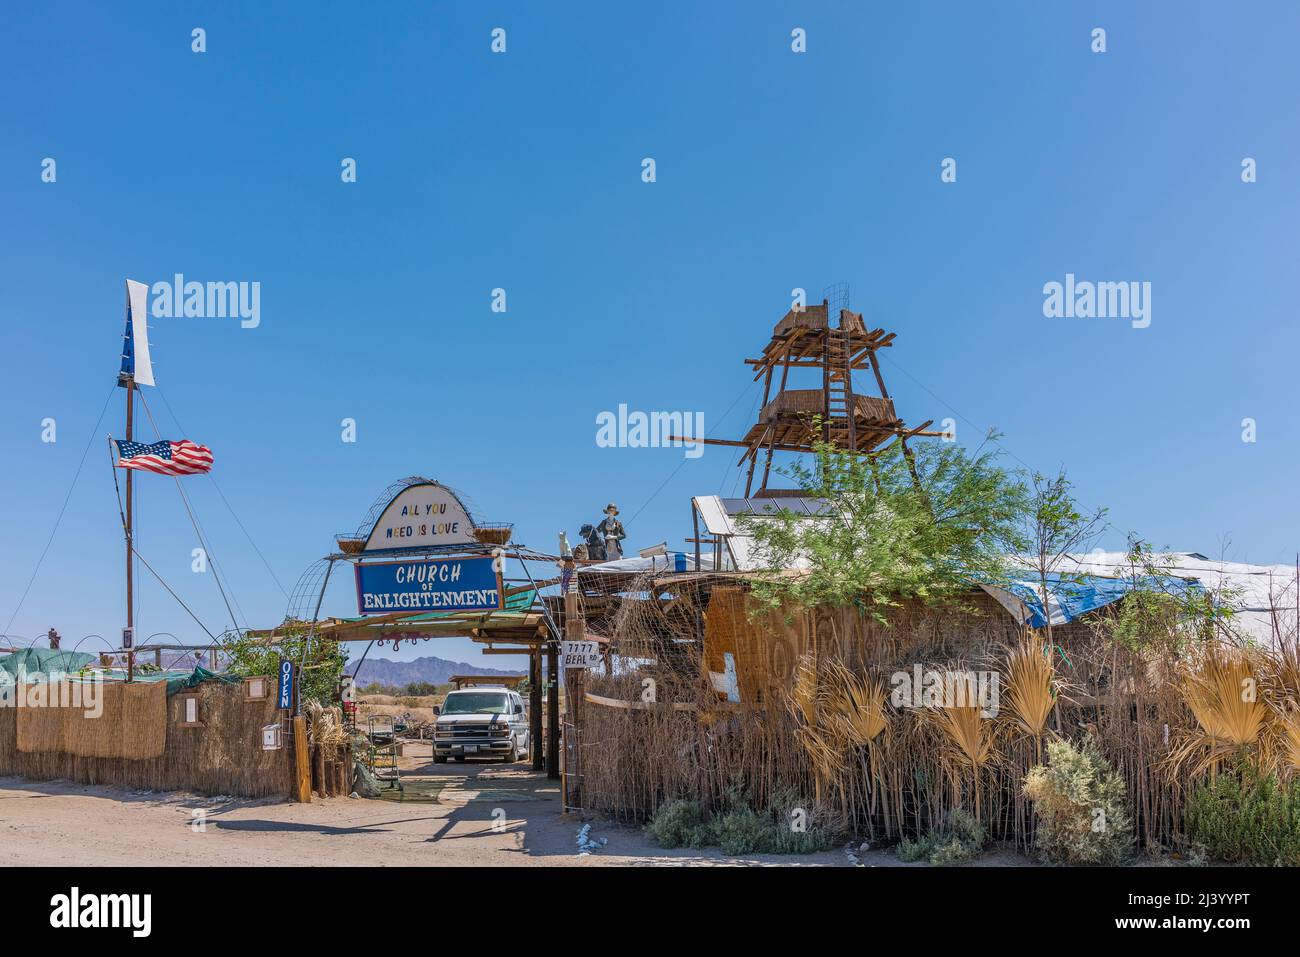 The Church of Enlightenment is an unconventinal church in the settlement of Slab City near the Salton Sea in Southern California. It is built out of w Stock Photo